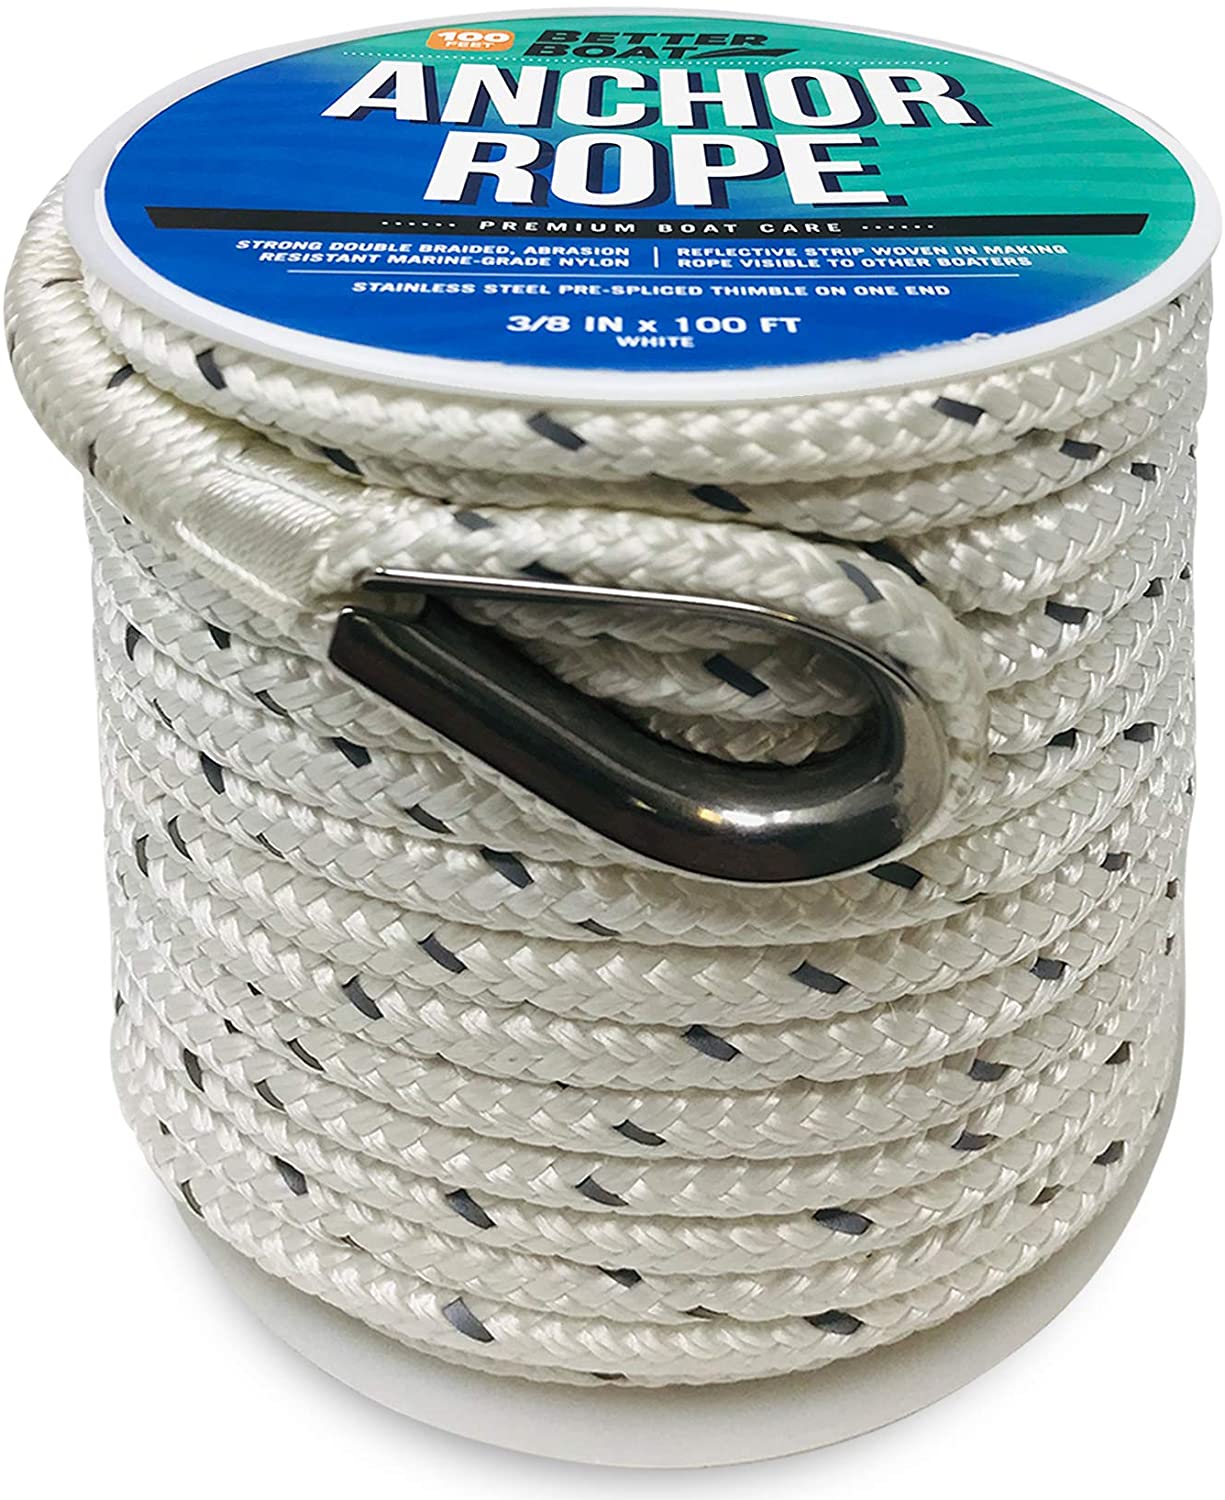 Boat Anchor Lines, Marine Anchor Rope